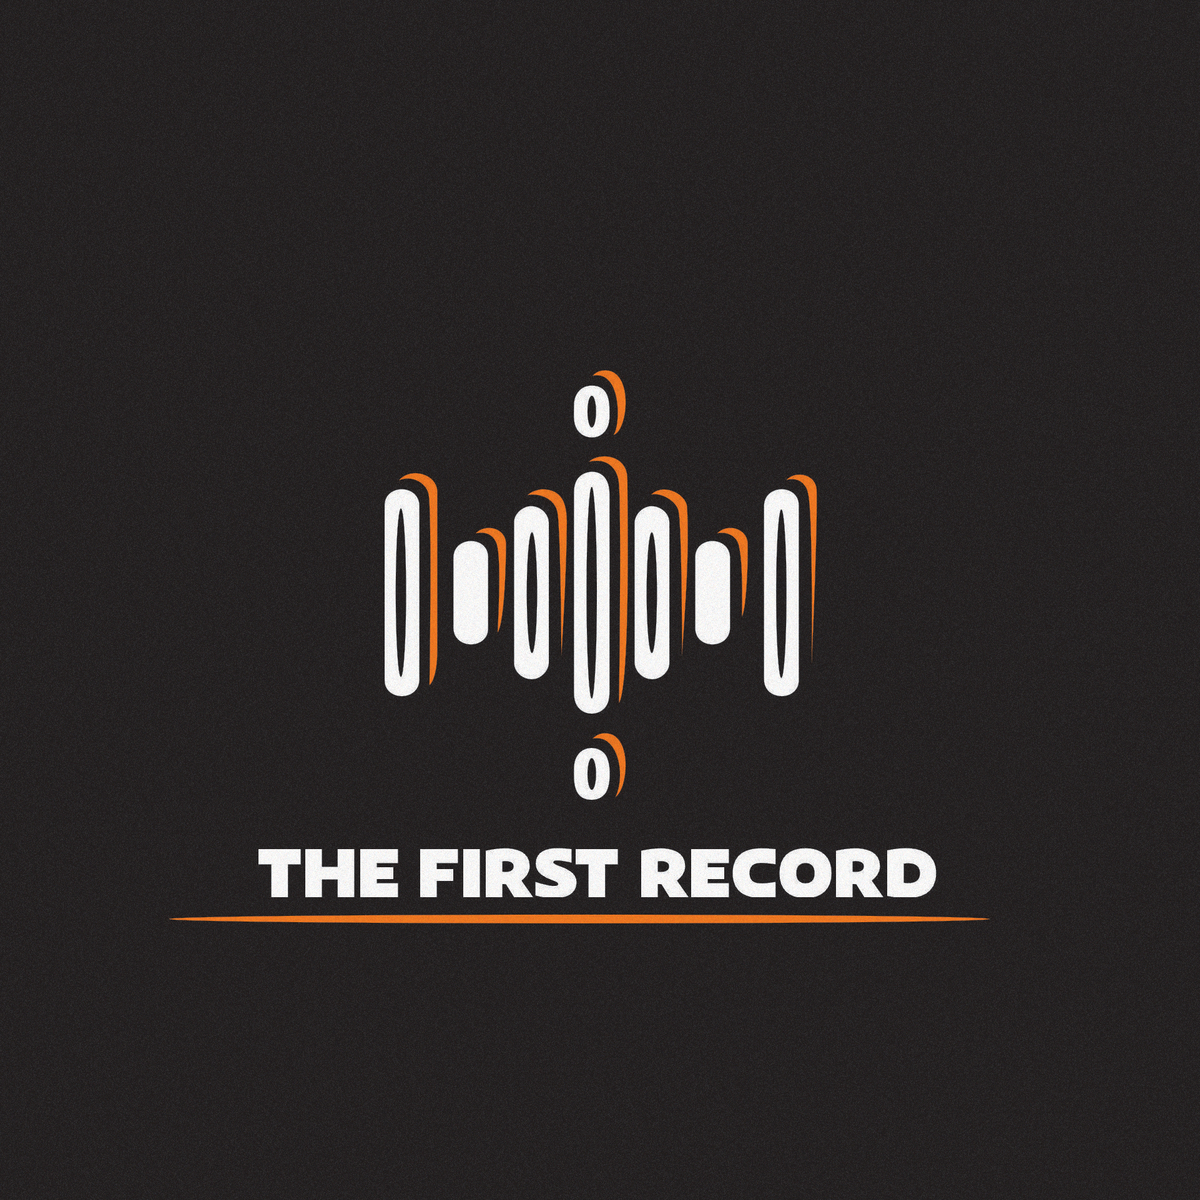 The First Record logo design. by LeDK on Dribbble